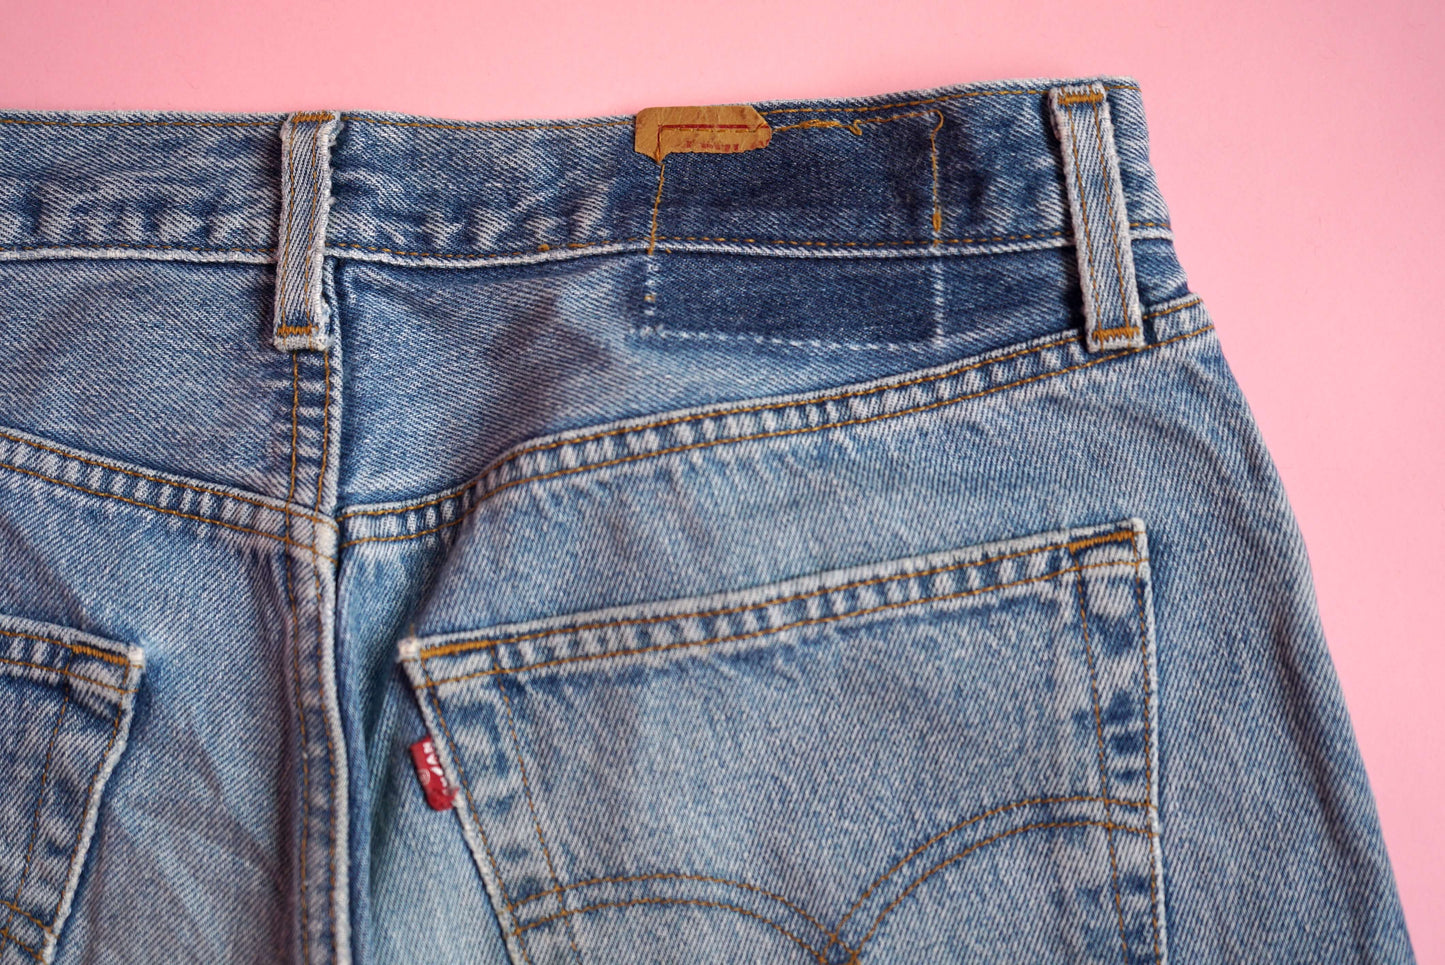 Vintage Levis 501 Womens Jeans Made in USA W31-32